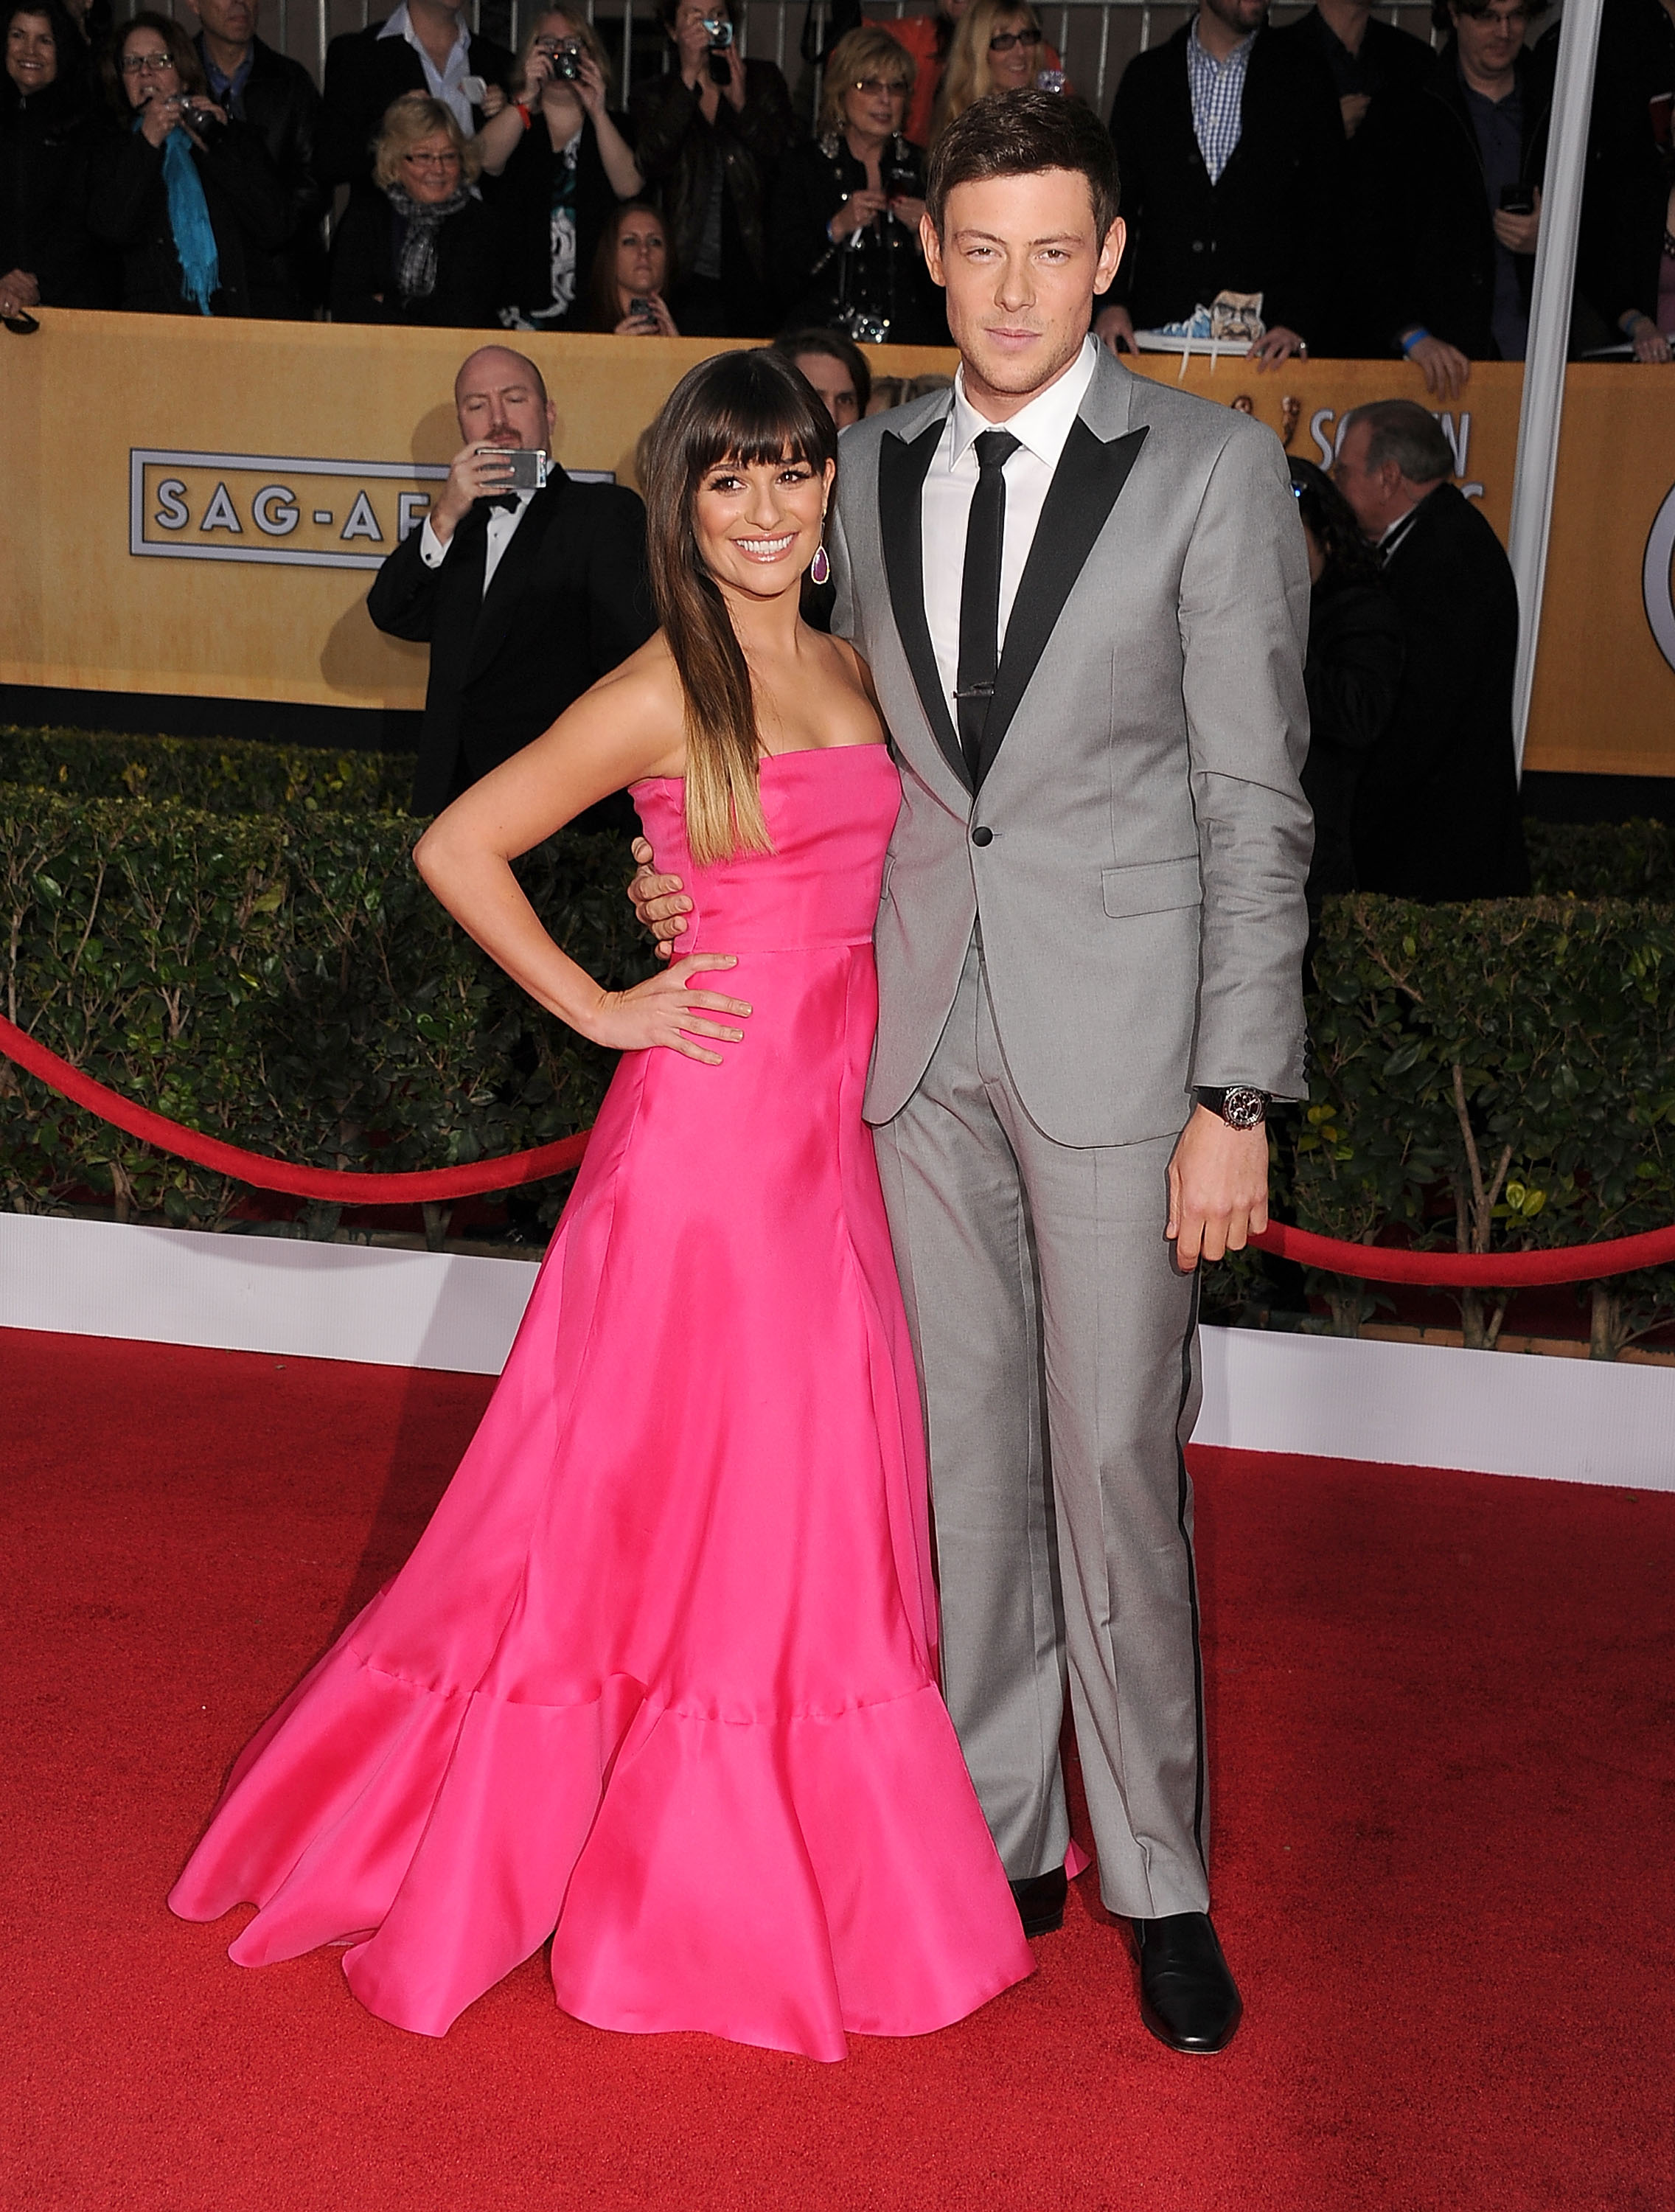 Cory Monteith and Lea Michele attending the 19th Annual Screen Actors Guild Awards on January 27, 2013 | Source: Getty Images